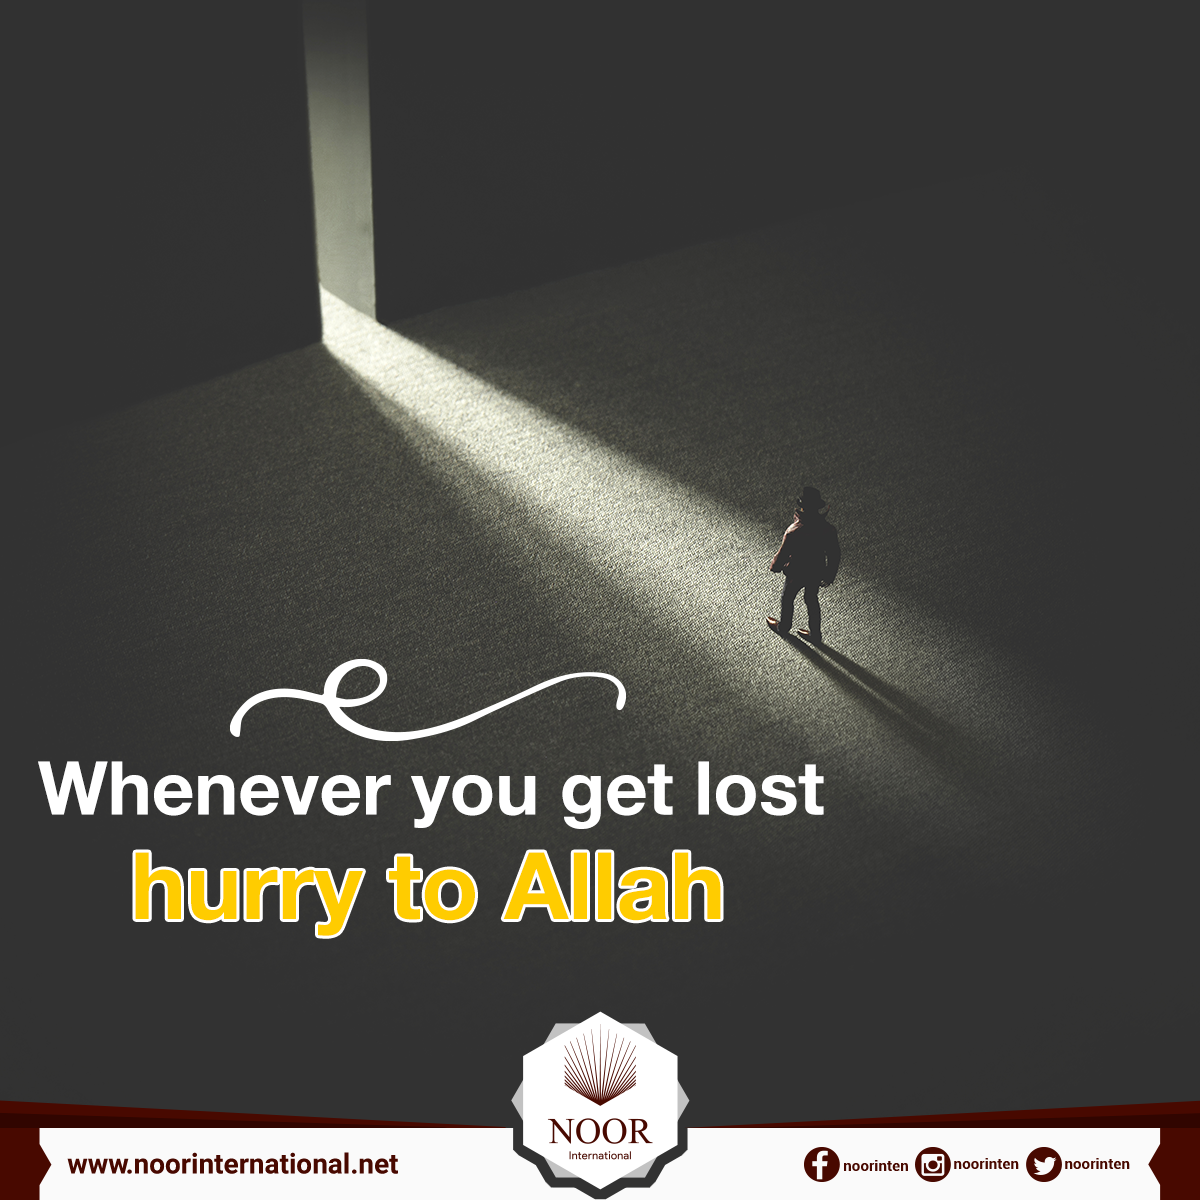 Whenever you get lost, hurry to Allah